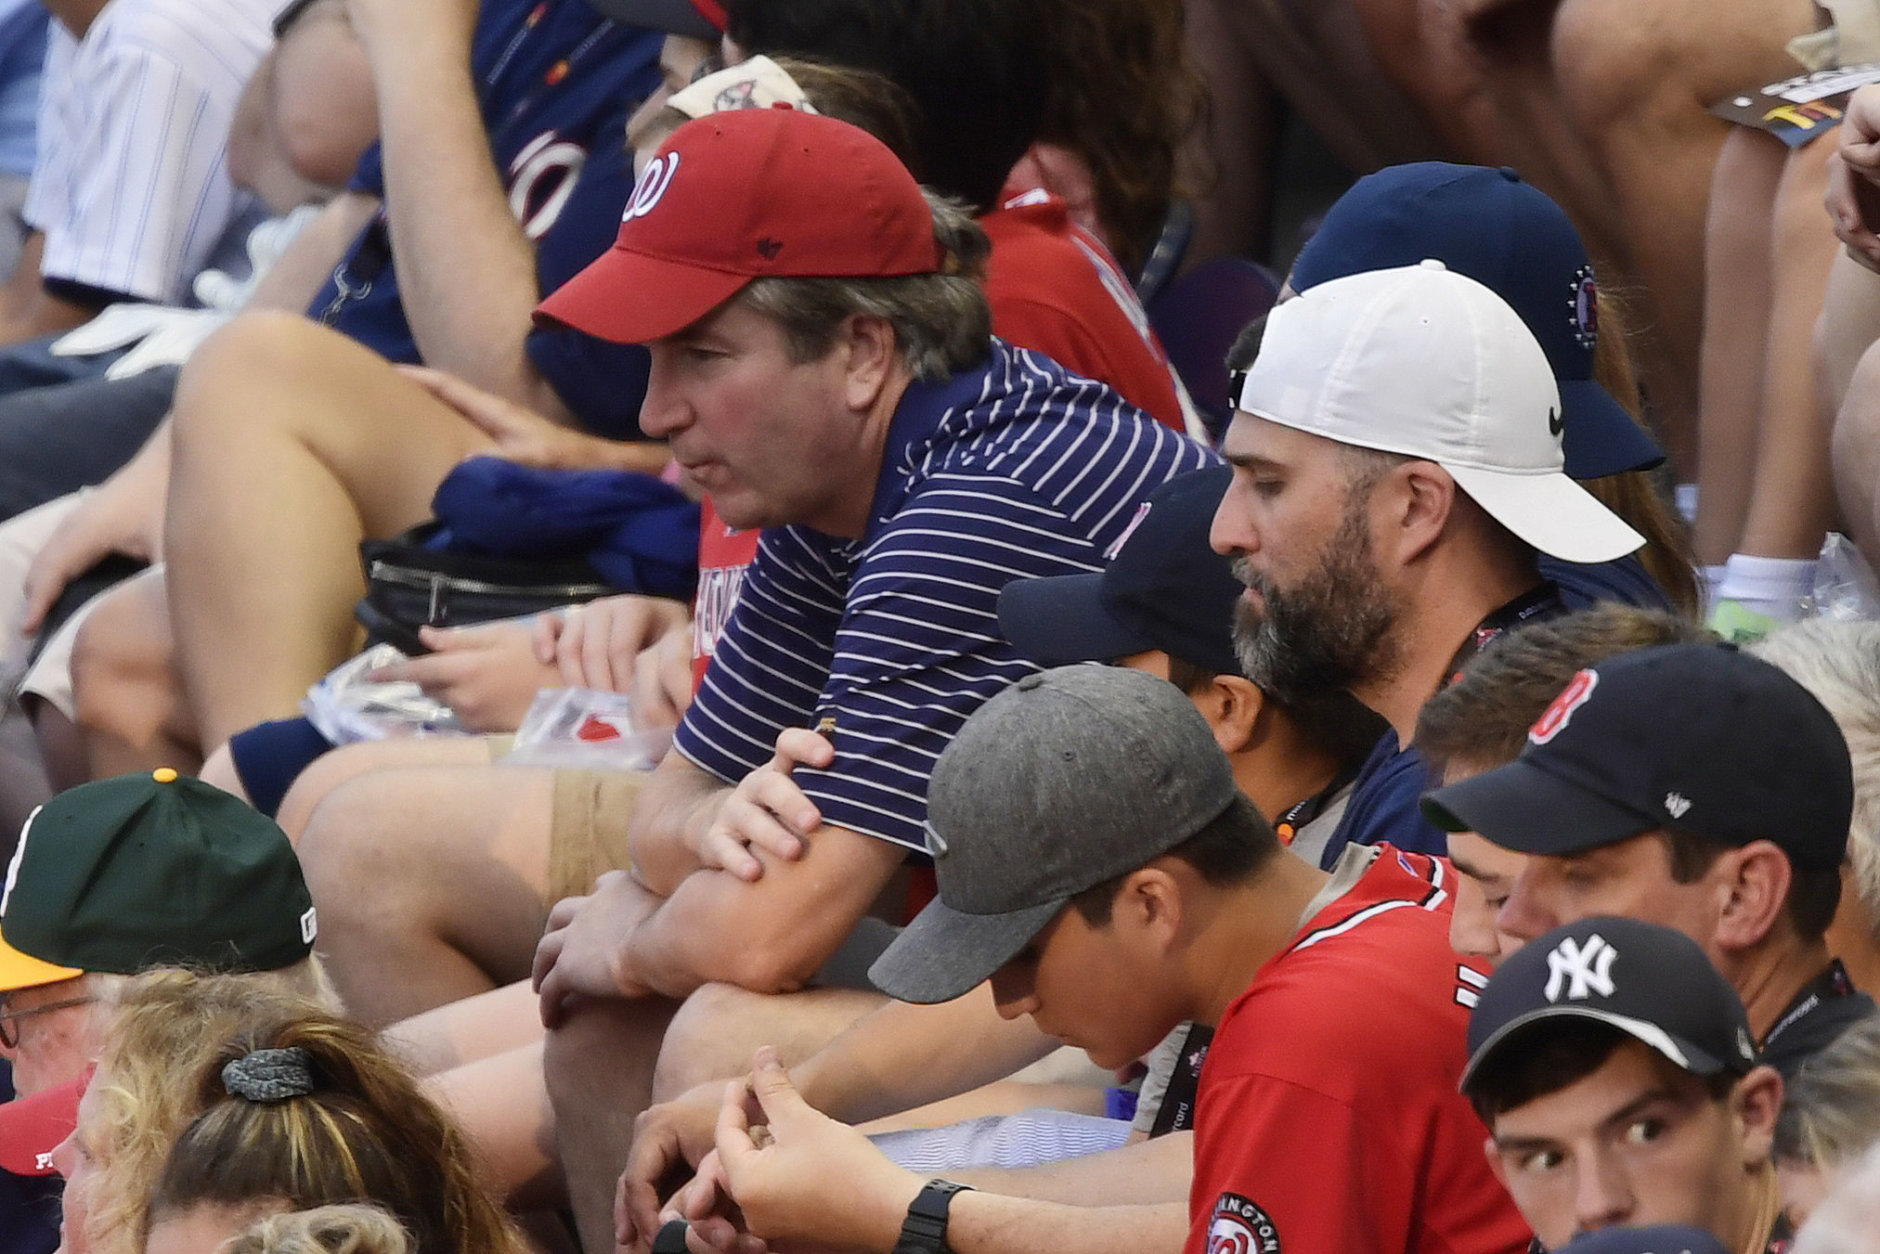 CORRECTS SPELLING TO KAVANAUGH, INSTEAD OF KAVANUAGH - Supreme Court nominee Judge Brett Kavanaugh, in red hat, sits in the stands before the Major League Baseball All-star Game, Tuesday, July 17, 2018 in Washington. (AP Photo/Susan Walsh)